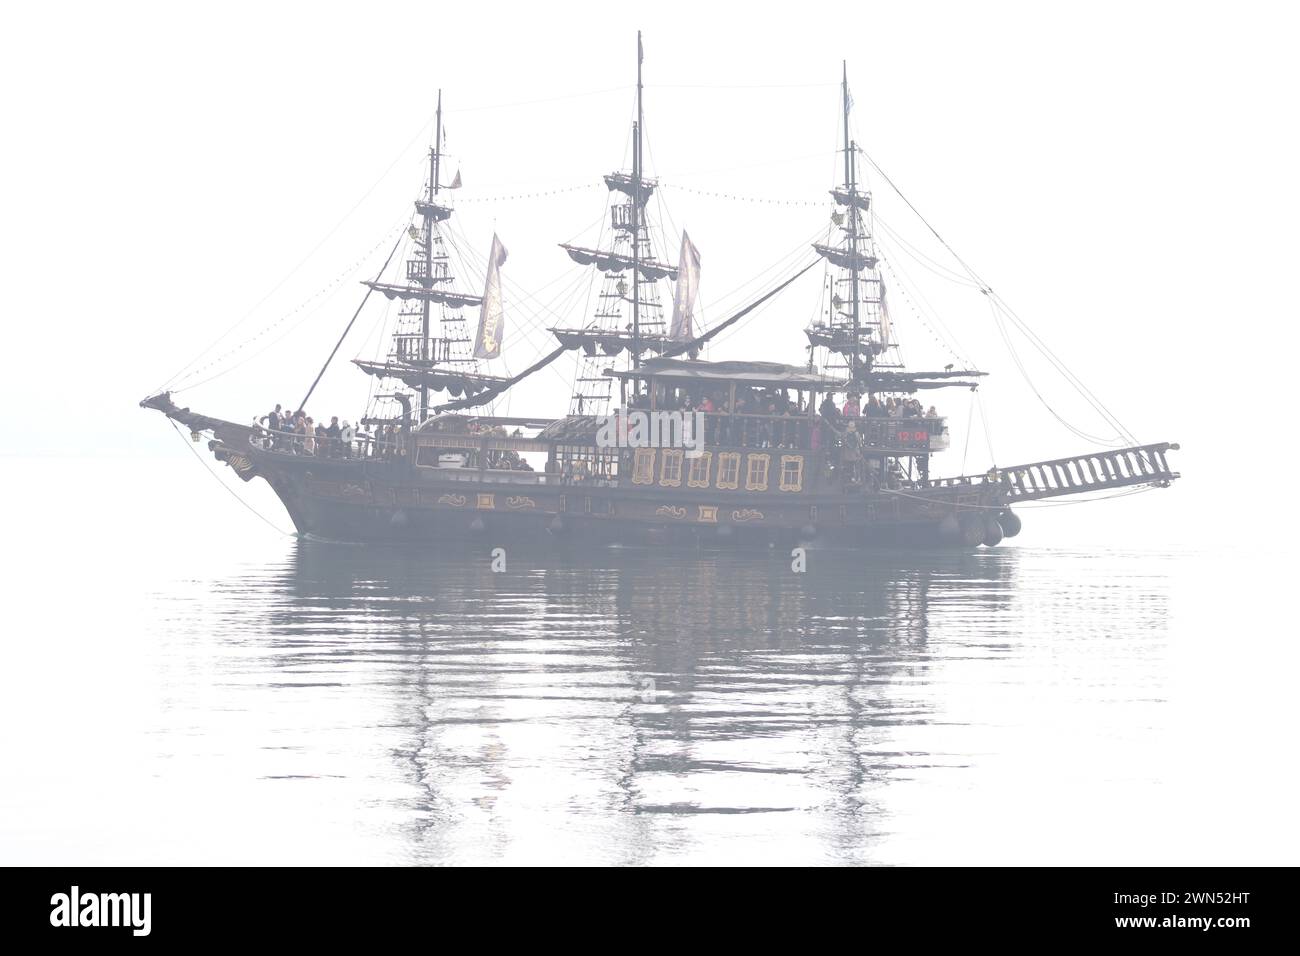 Ghostly voyage. Pirate ship tourist attraction cruising in the misty aegean sea. Stock Photo